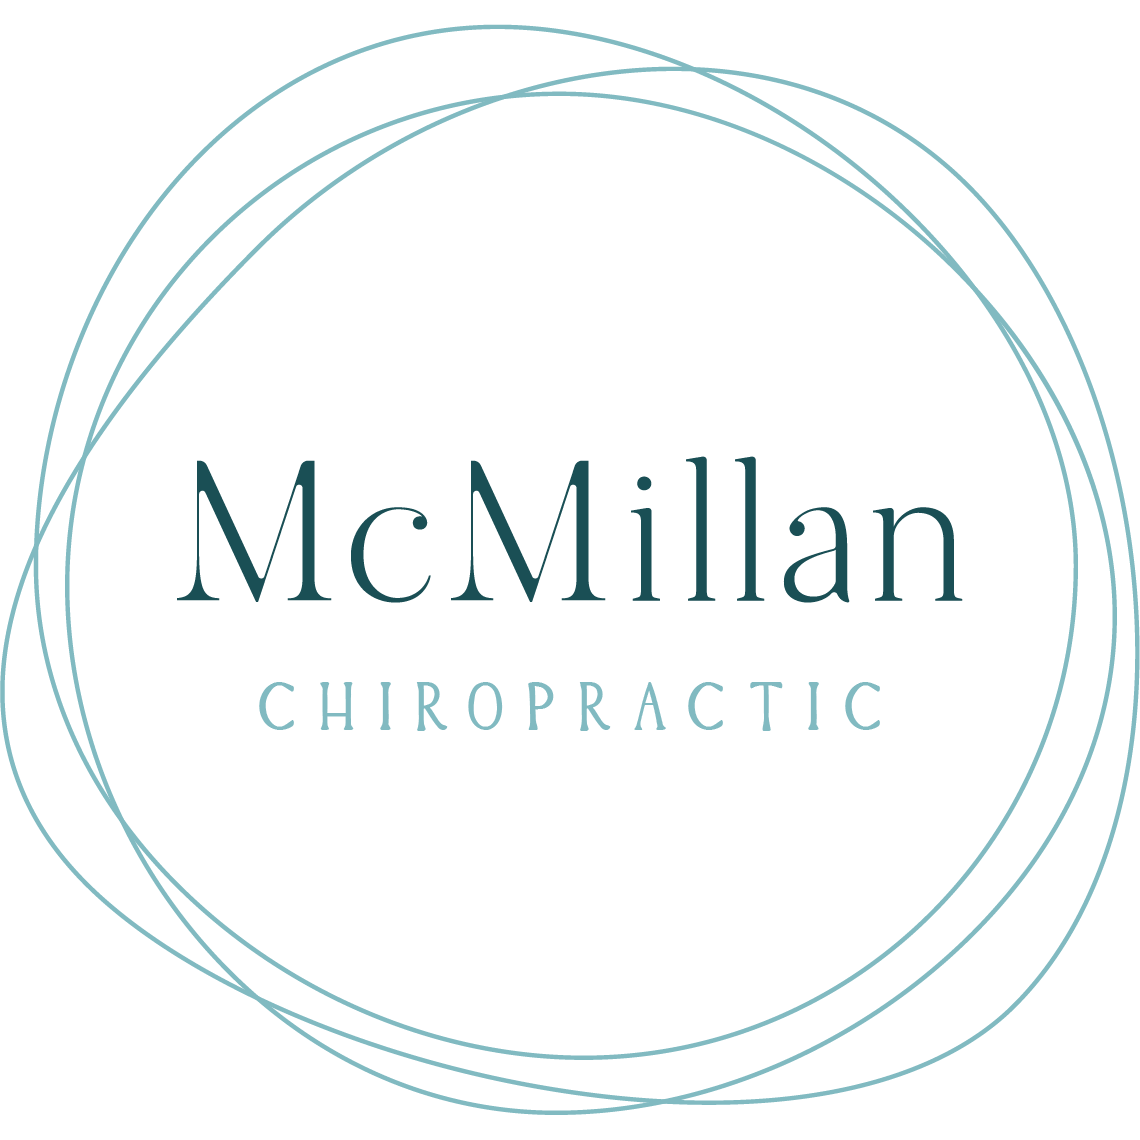 McMillan Chiropractic Centre - Bairnsdale, VIC 3875 - (03) 5152 2621 | ShowMeLocal.com